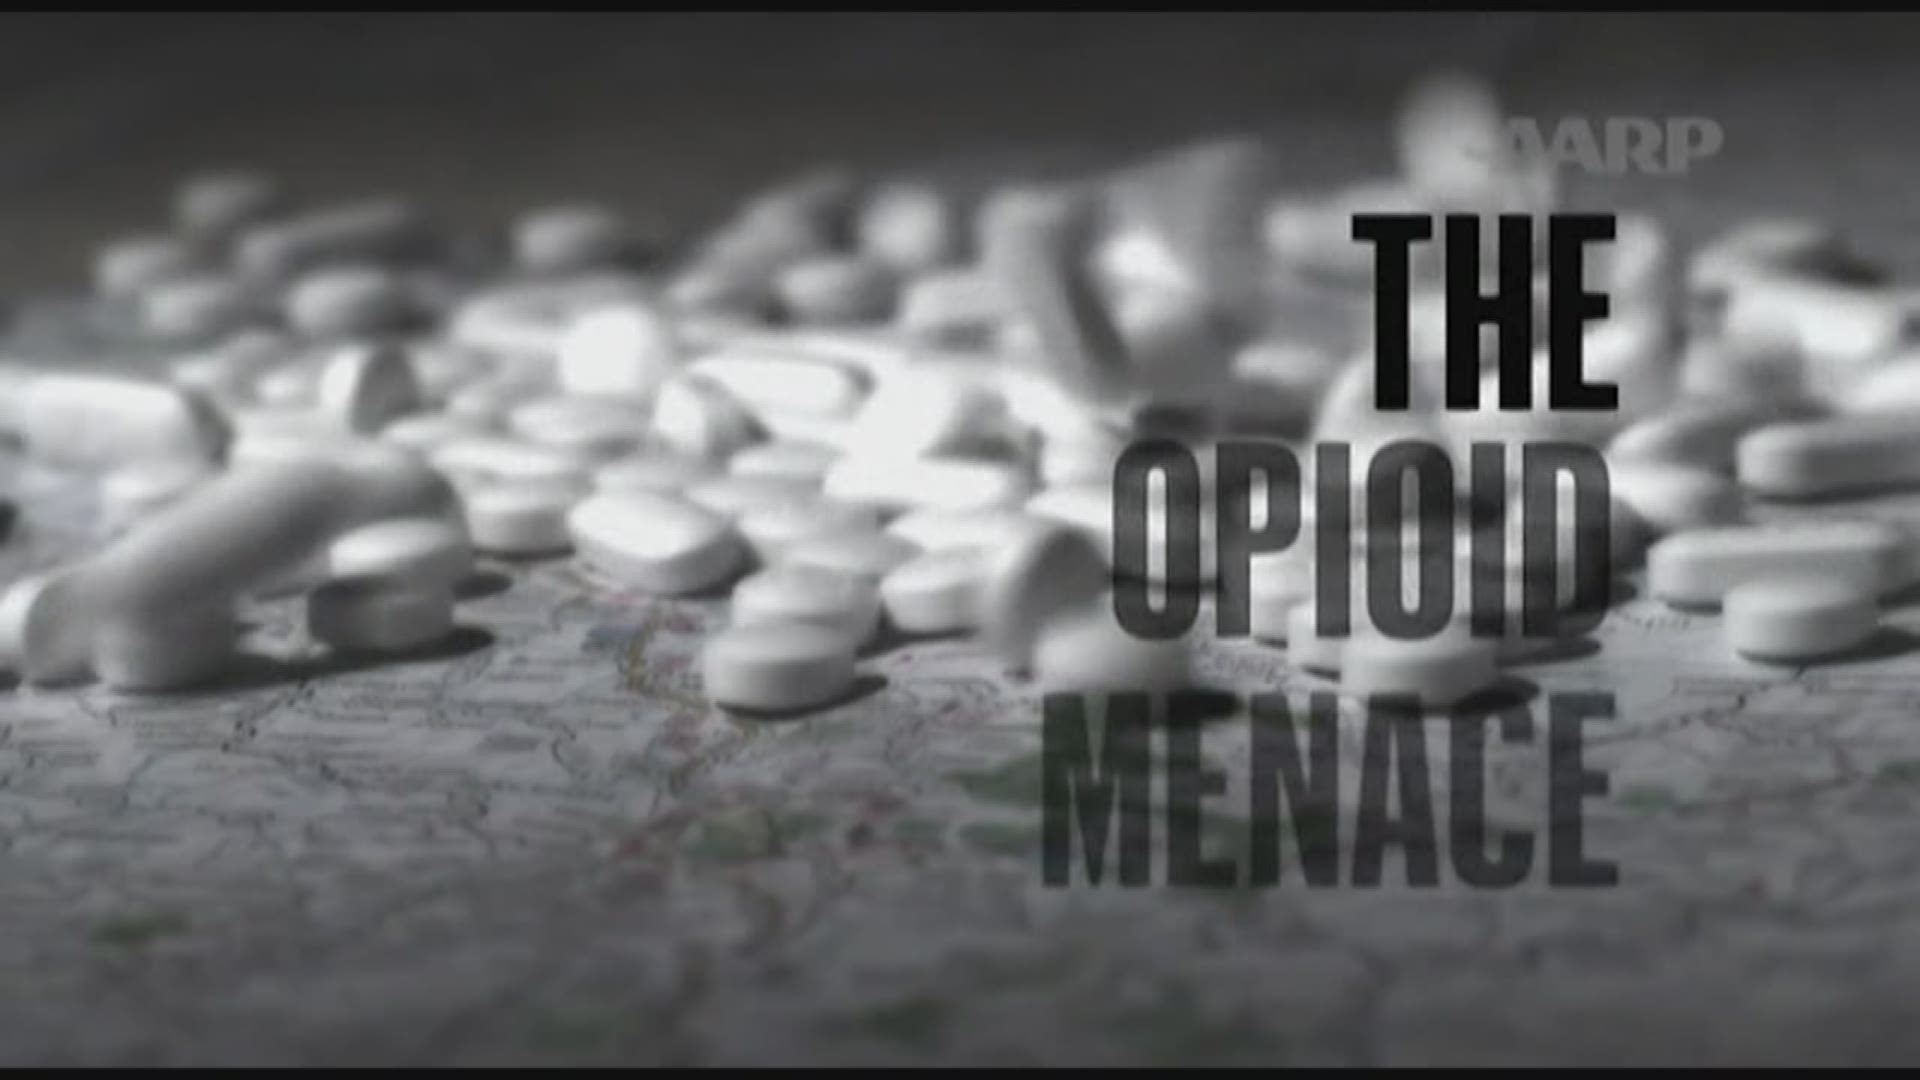 The country is facing a deadly drug epidemic - and this time, the victims are older Americans.